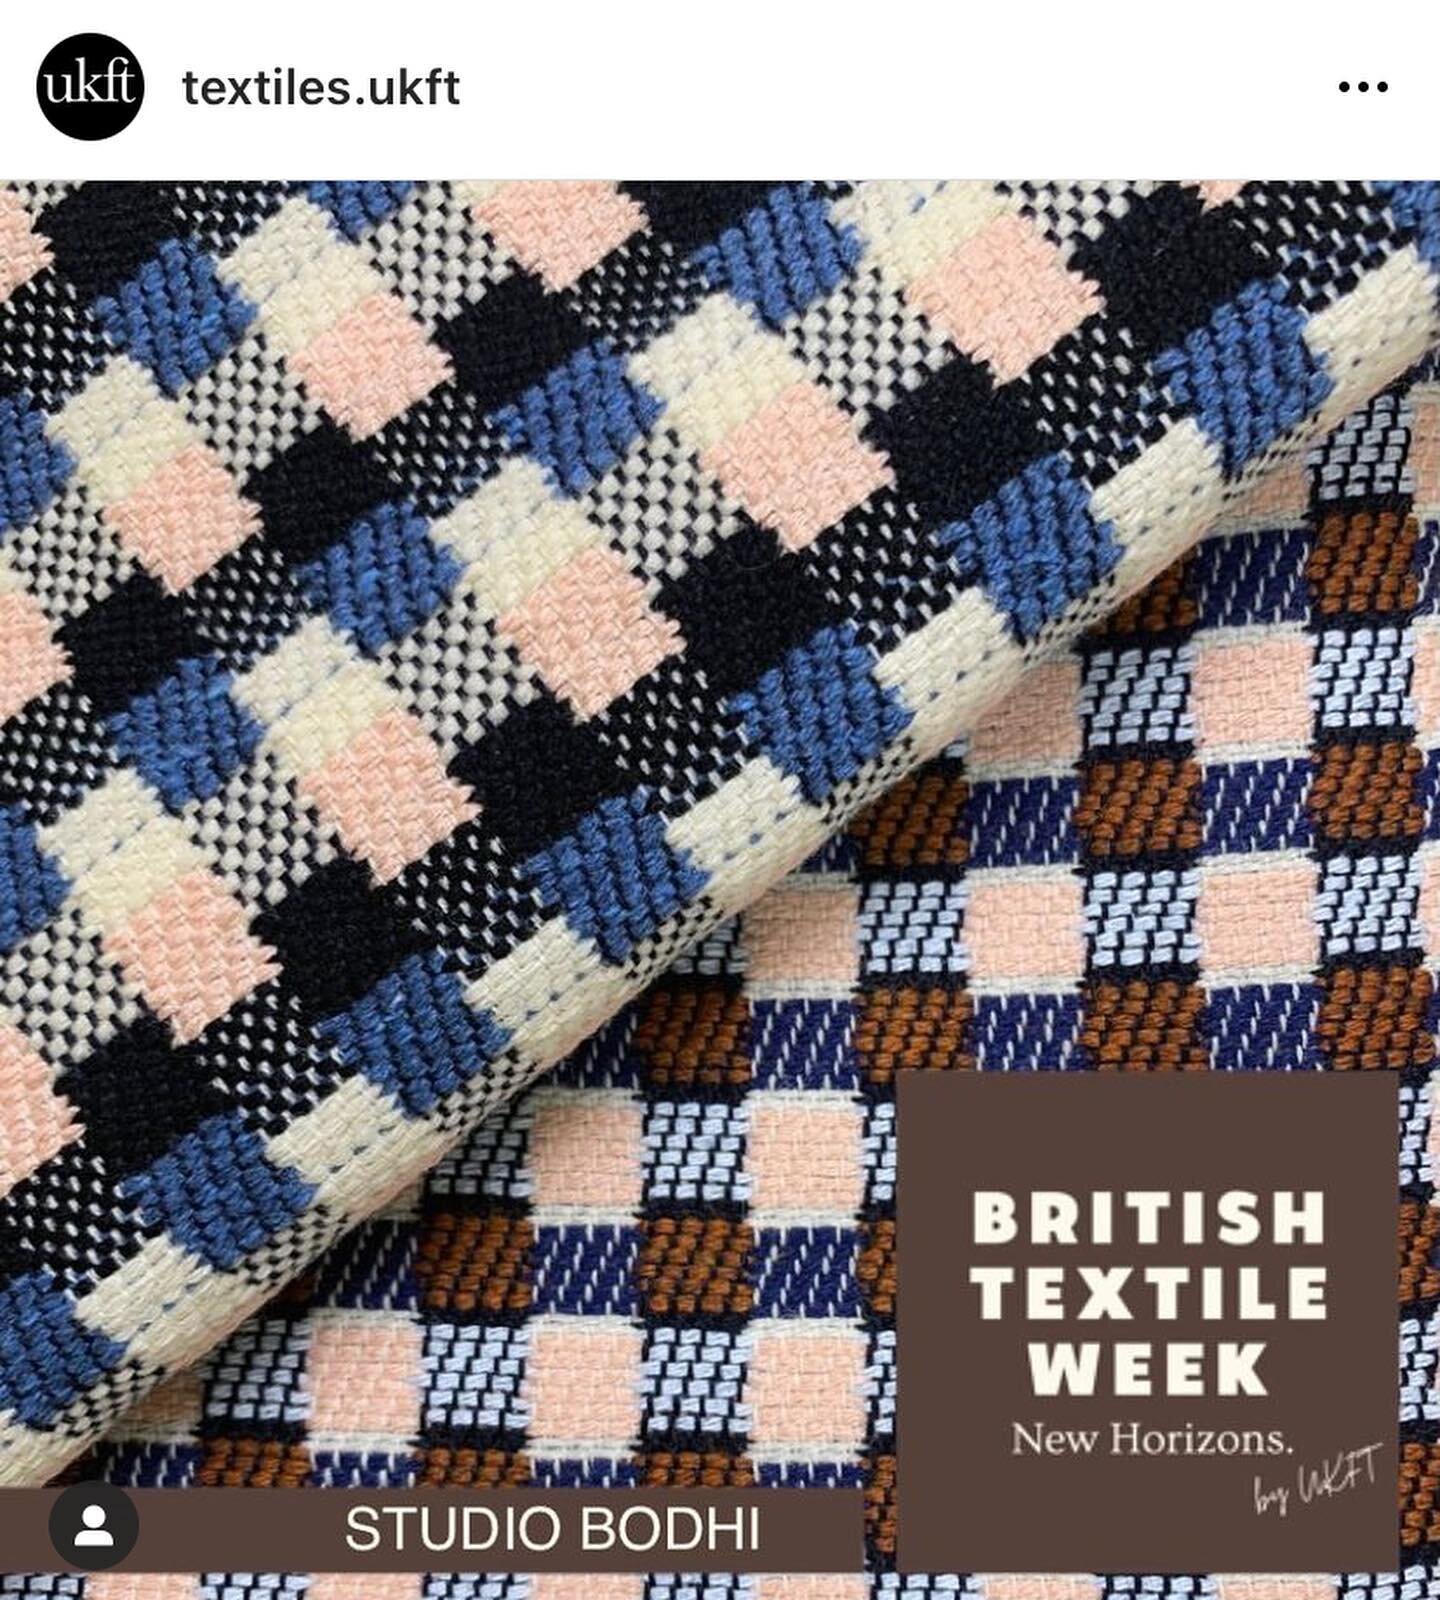 Studio Bodhi featured in #britishtextileweek thanks for the mention @textiles.ukft !✨

We&rsquo;re currently in Paris for client meetings, get in touch if you&rsquo;d like to see our latest collection ⚡️Visiting @wearepremierevision tomorrow 👋

#bri